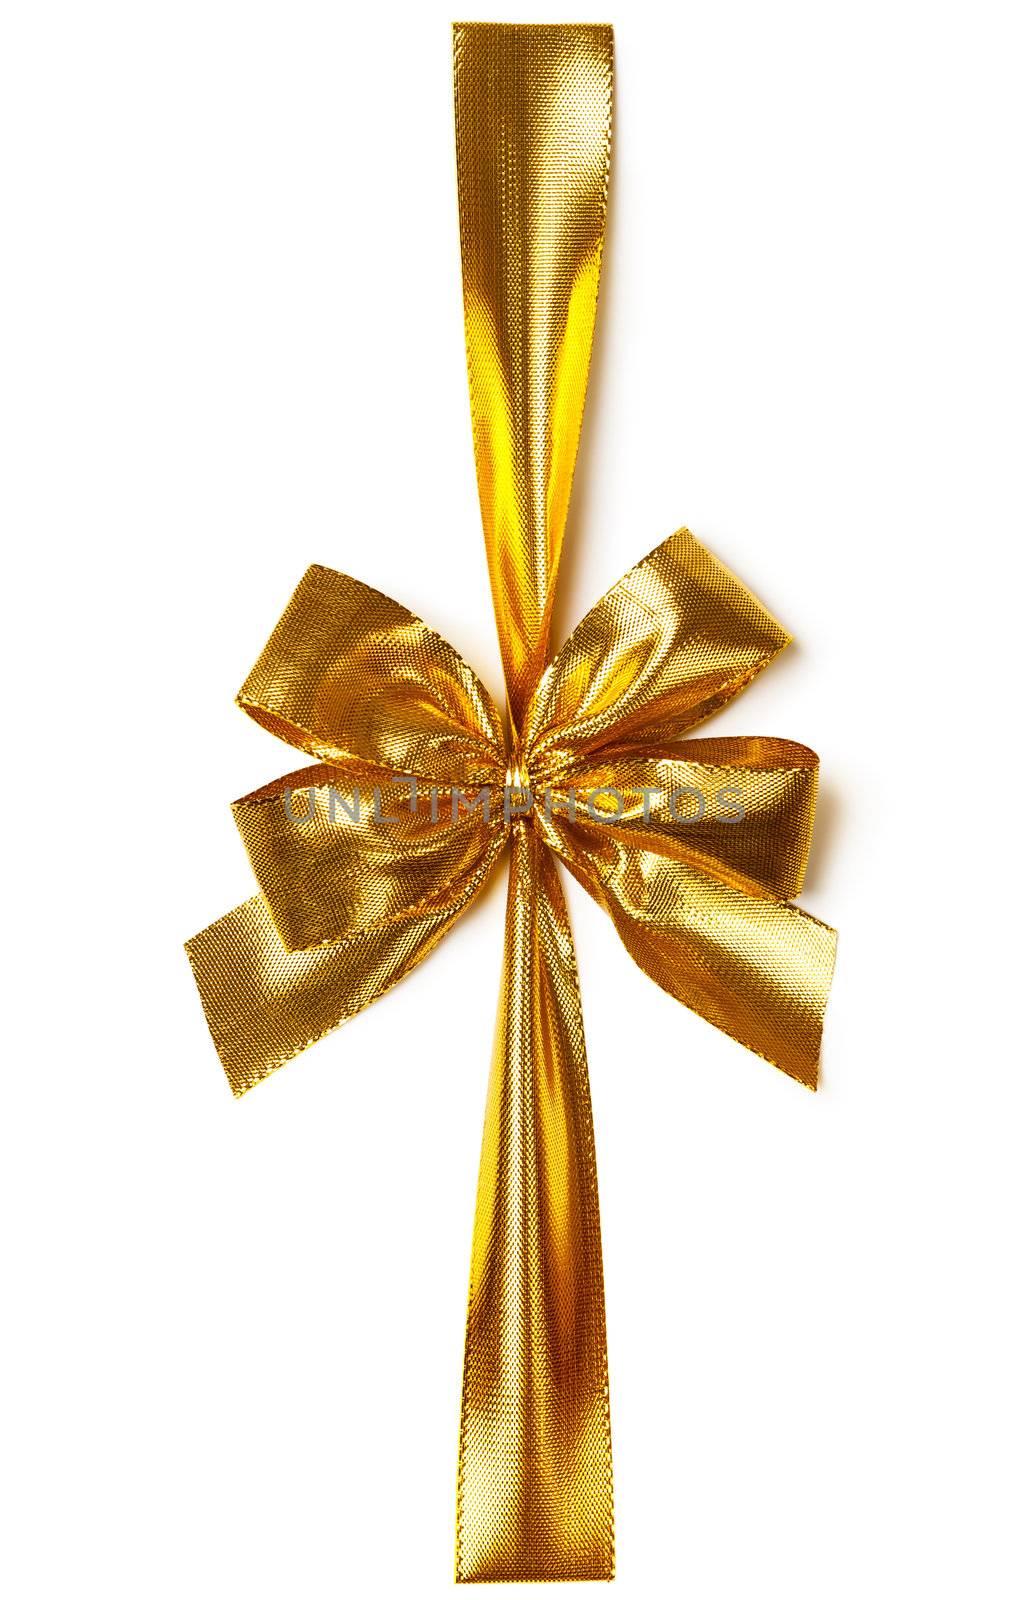 Golden ribbon with bow on white background. Top view